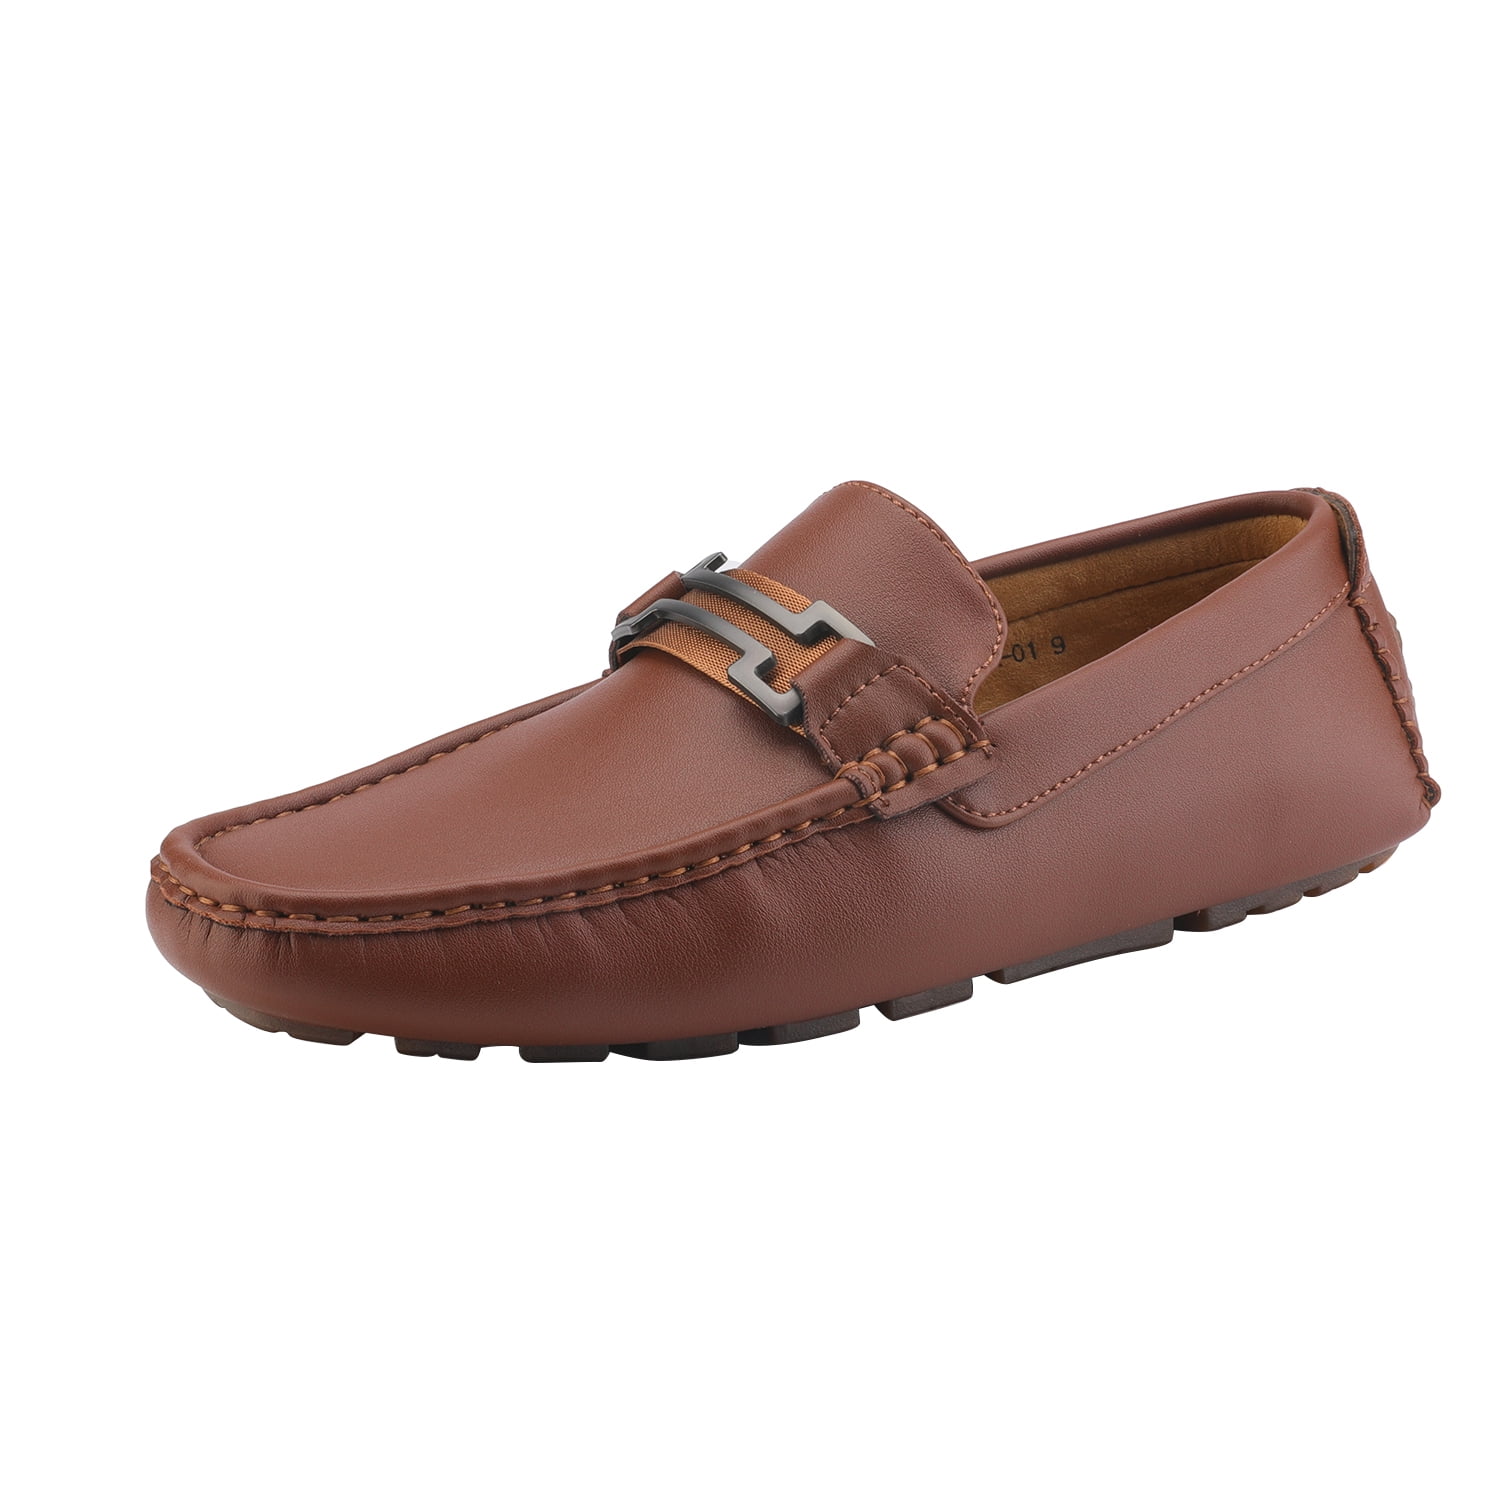 Men's Leather Casual Tooling Driving Boat Shoes Penny Loafers Slip on Moccasins 